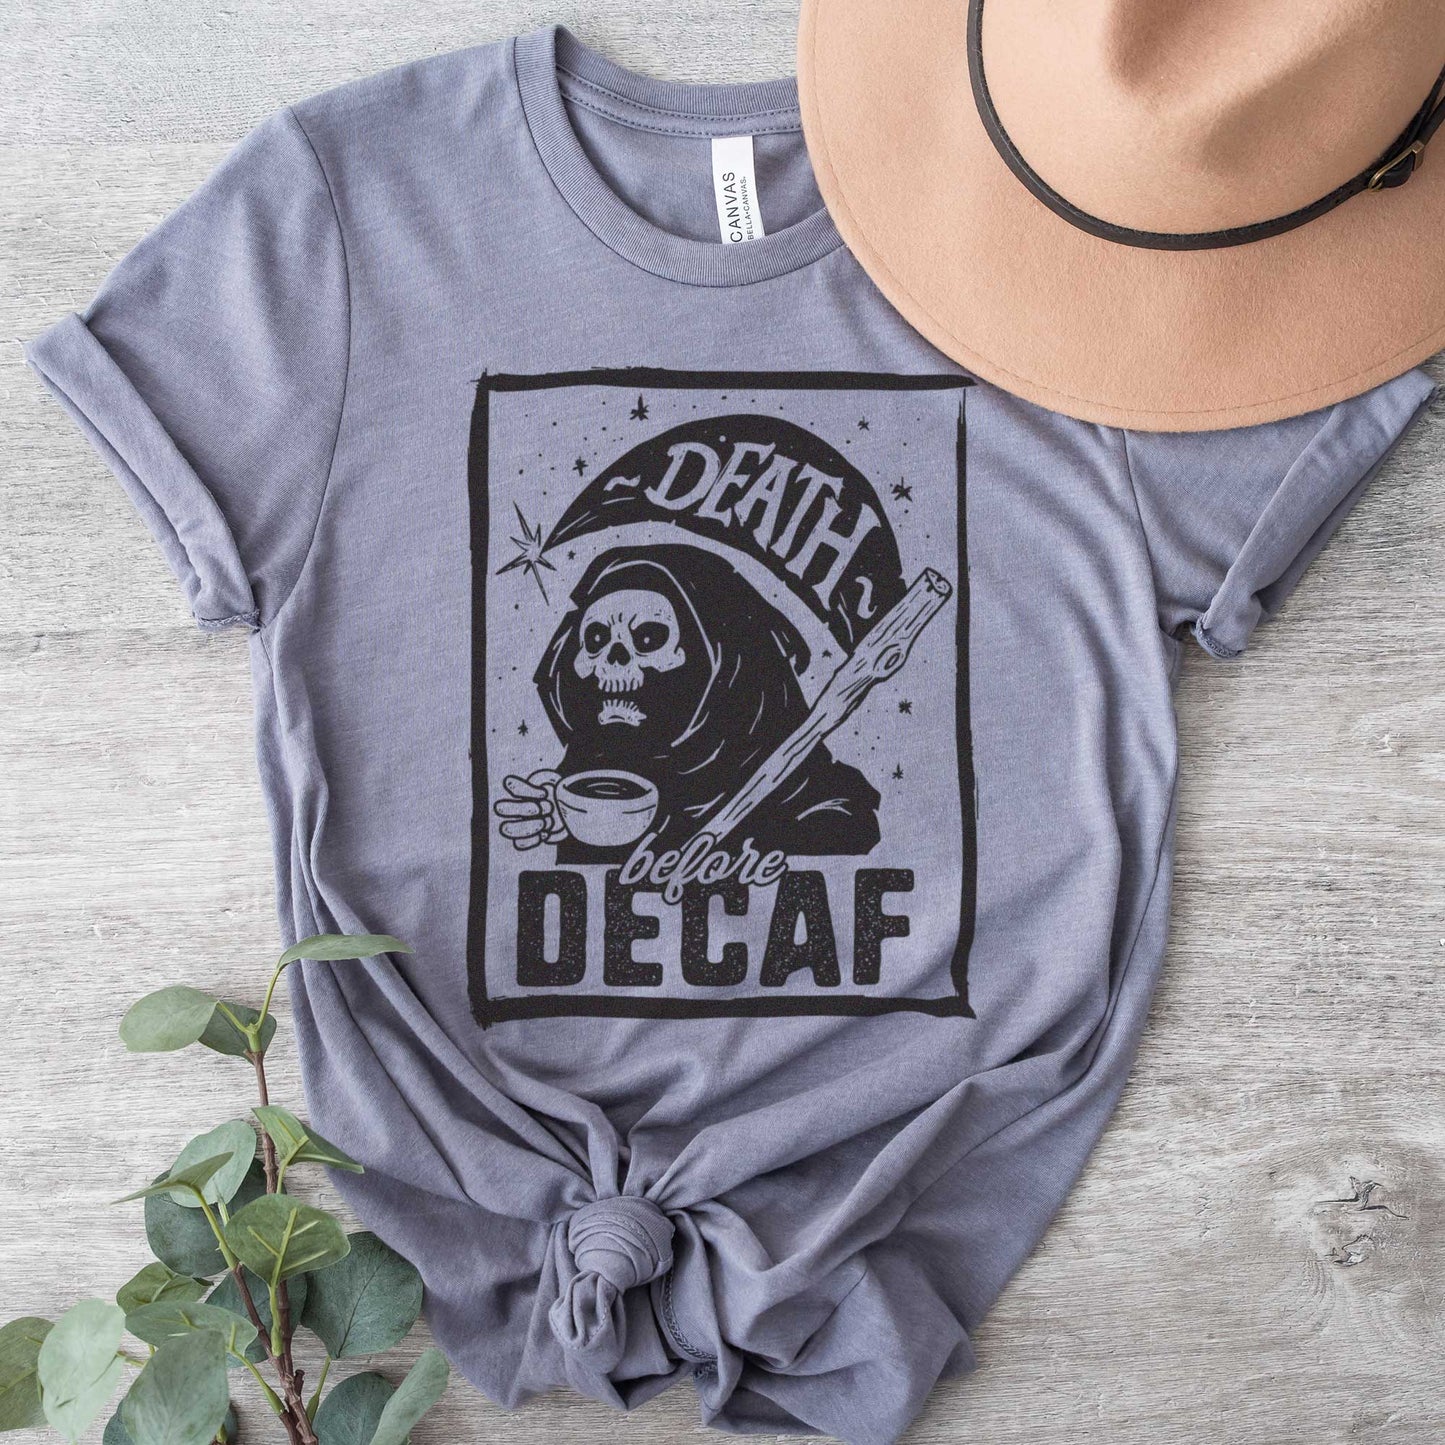 A storm gray Bella Canvas t-shirt featuring the grim reaper drinking a cup of coffee with the words Death before decaf